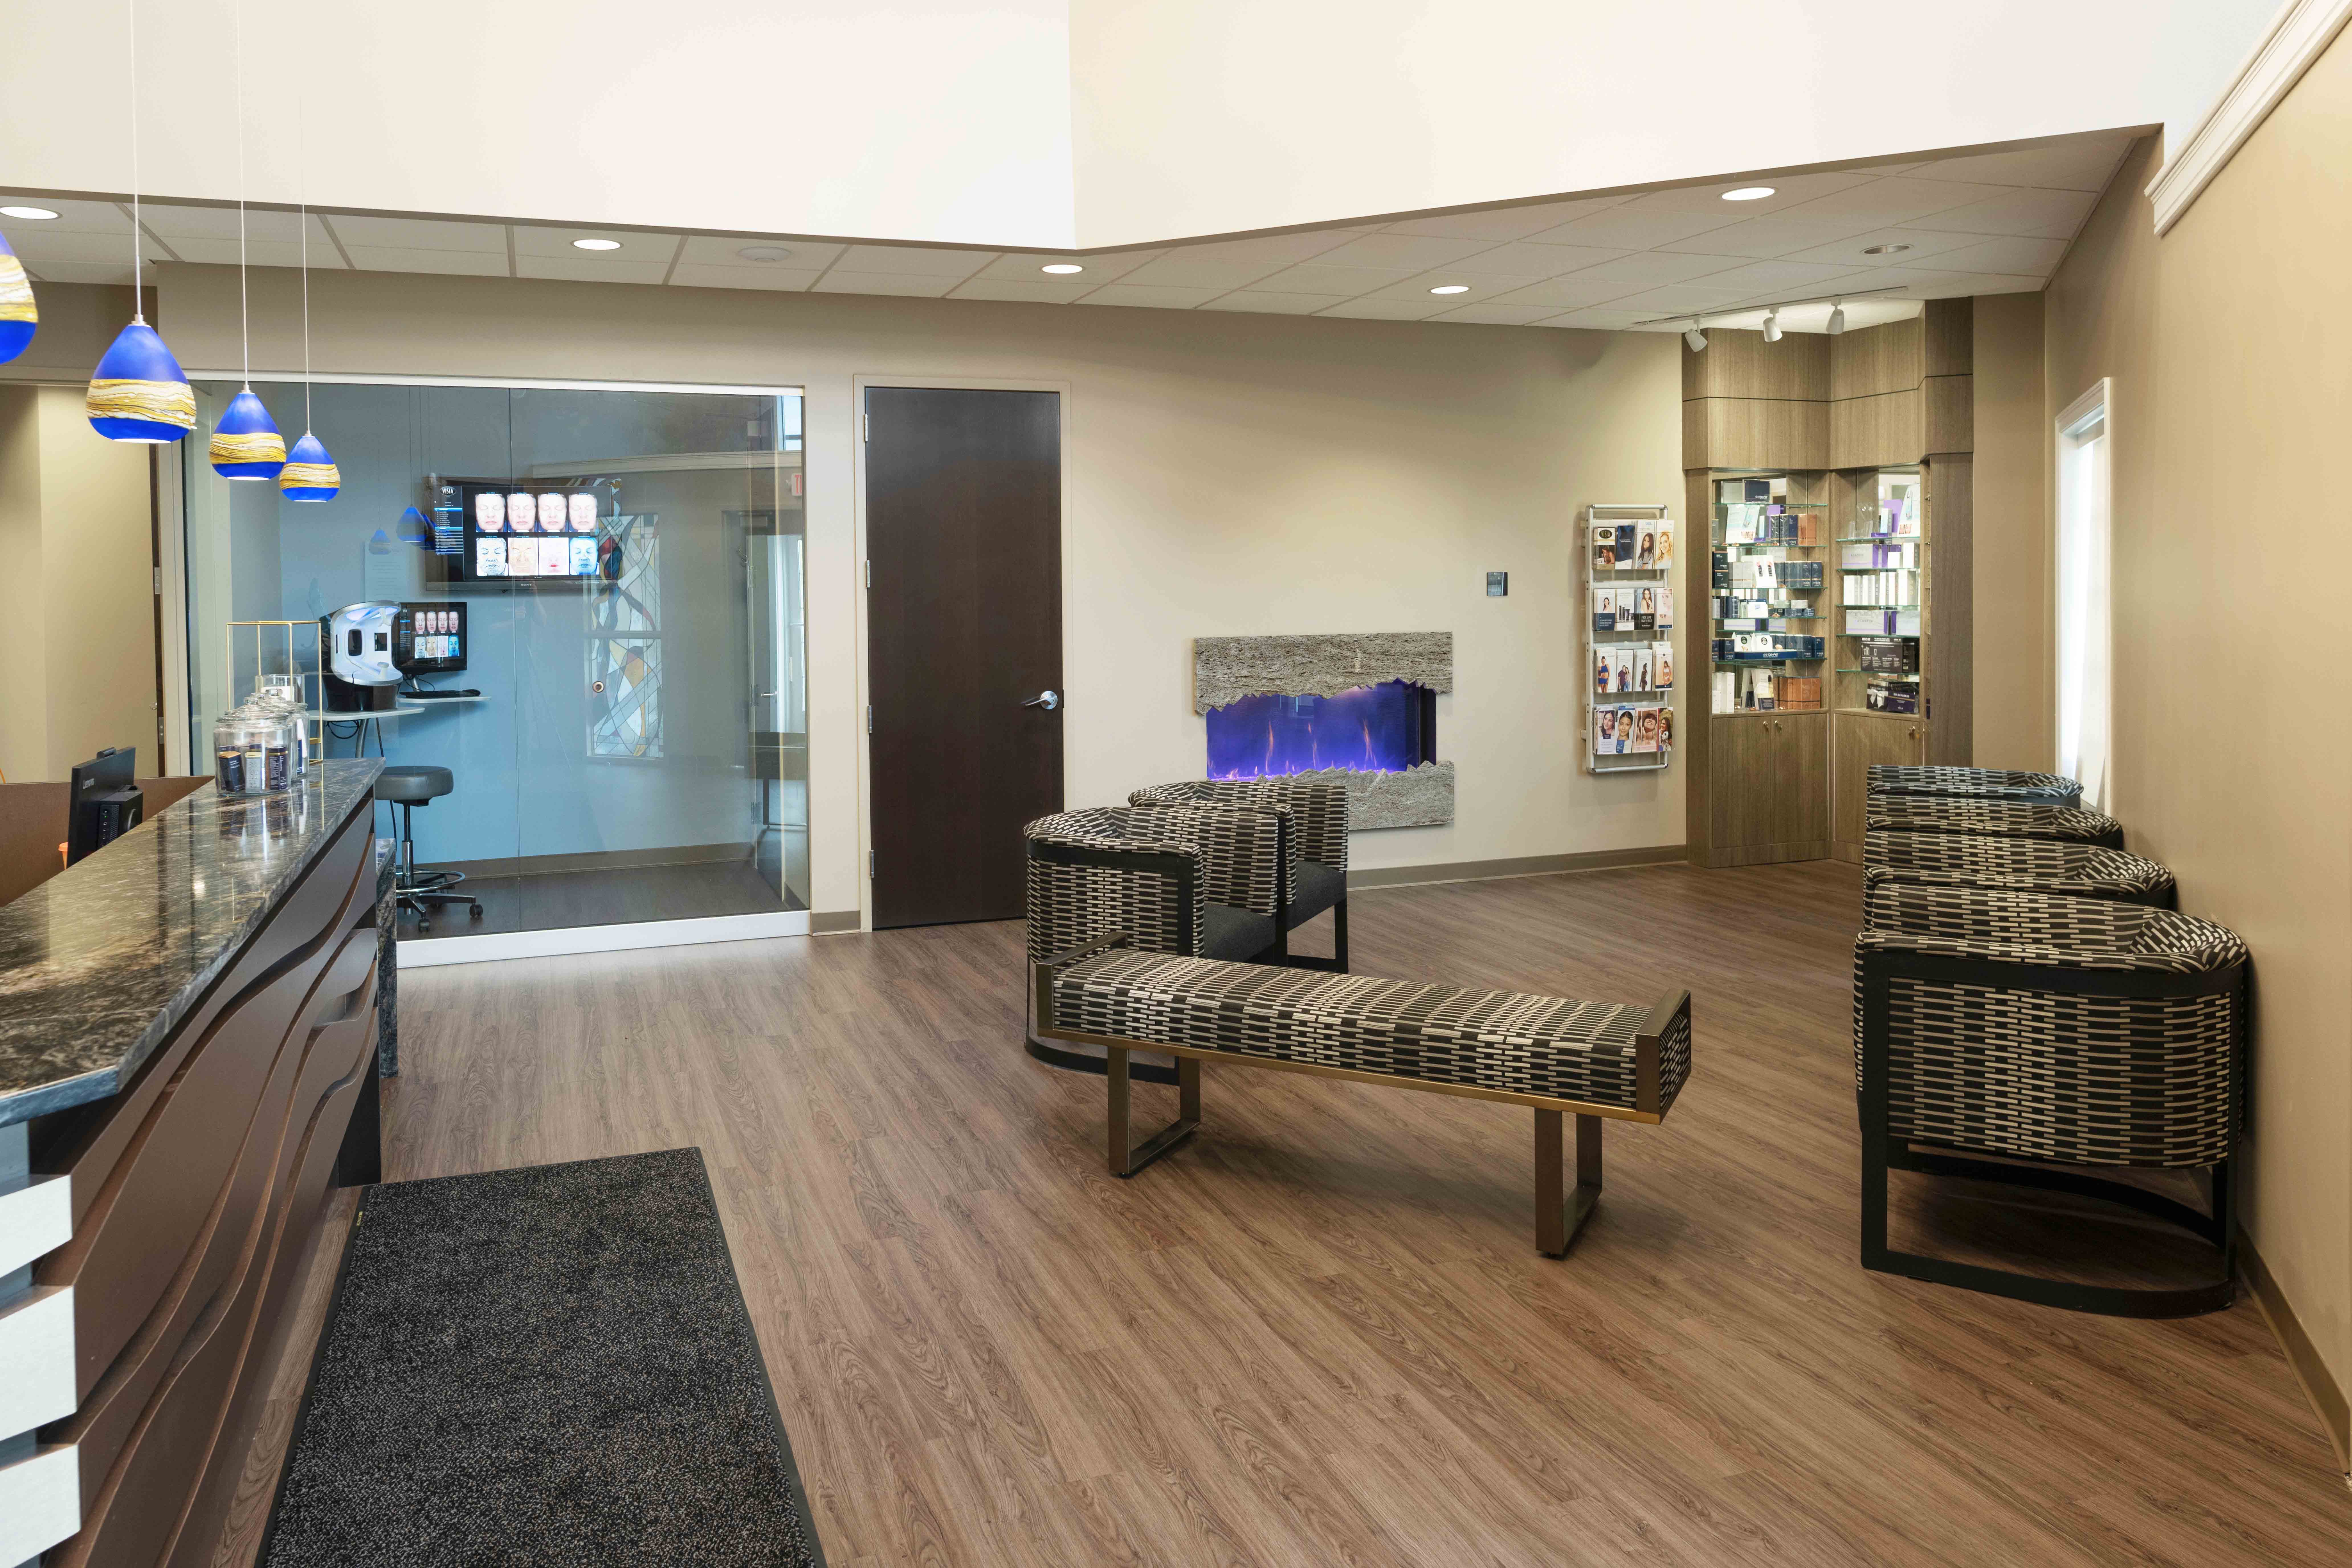 Mentor Plastic Surgery and MedSpa foyer and waiting room